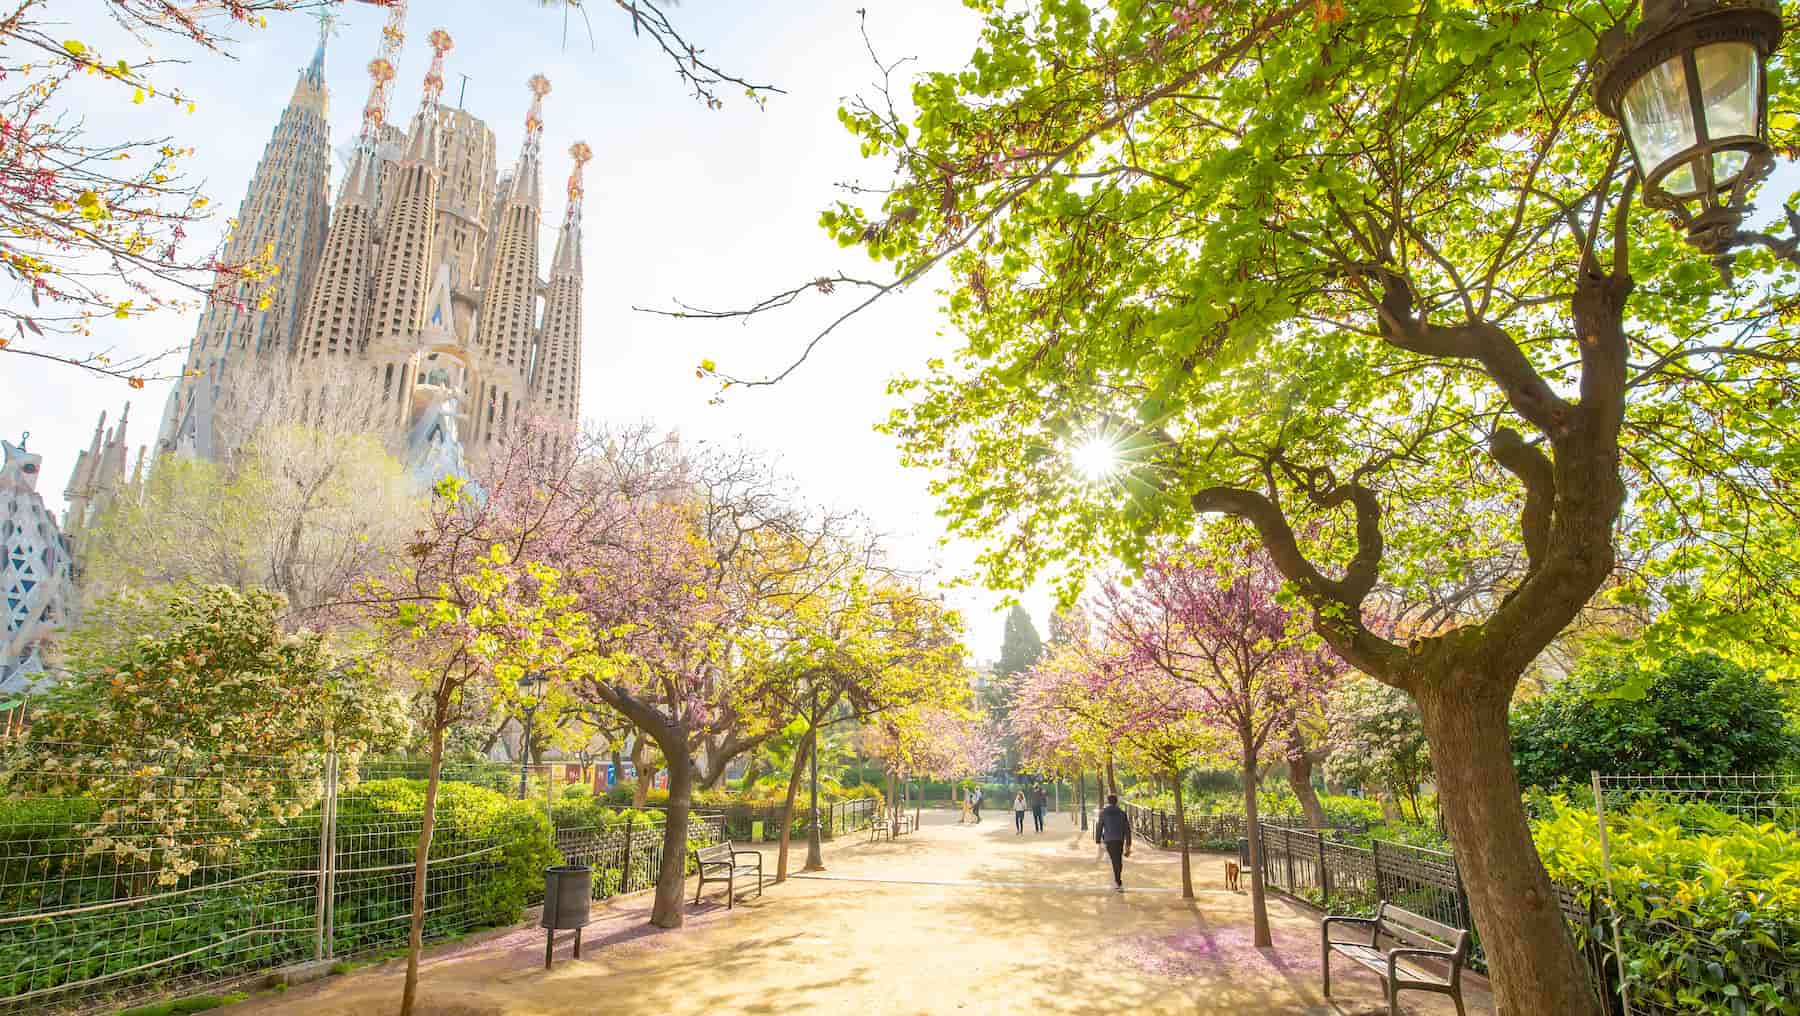 Blooming spring garden in Barcelona, Spain city centre. Photo by arcady_31, iStock